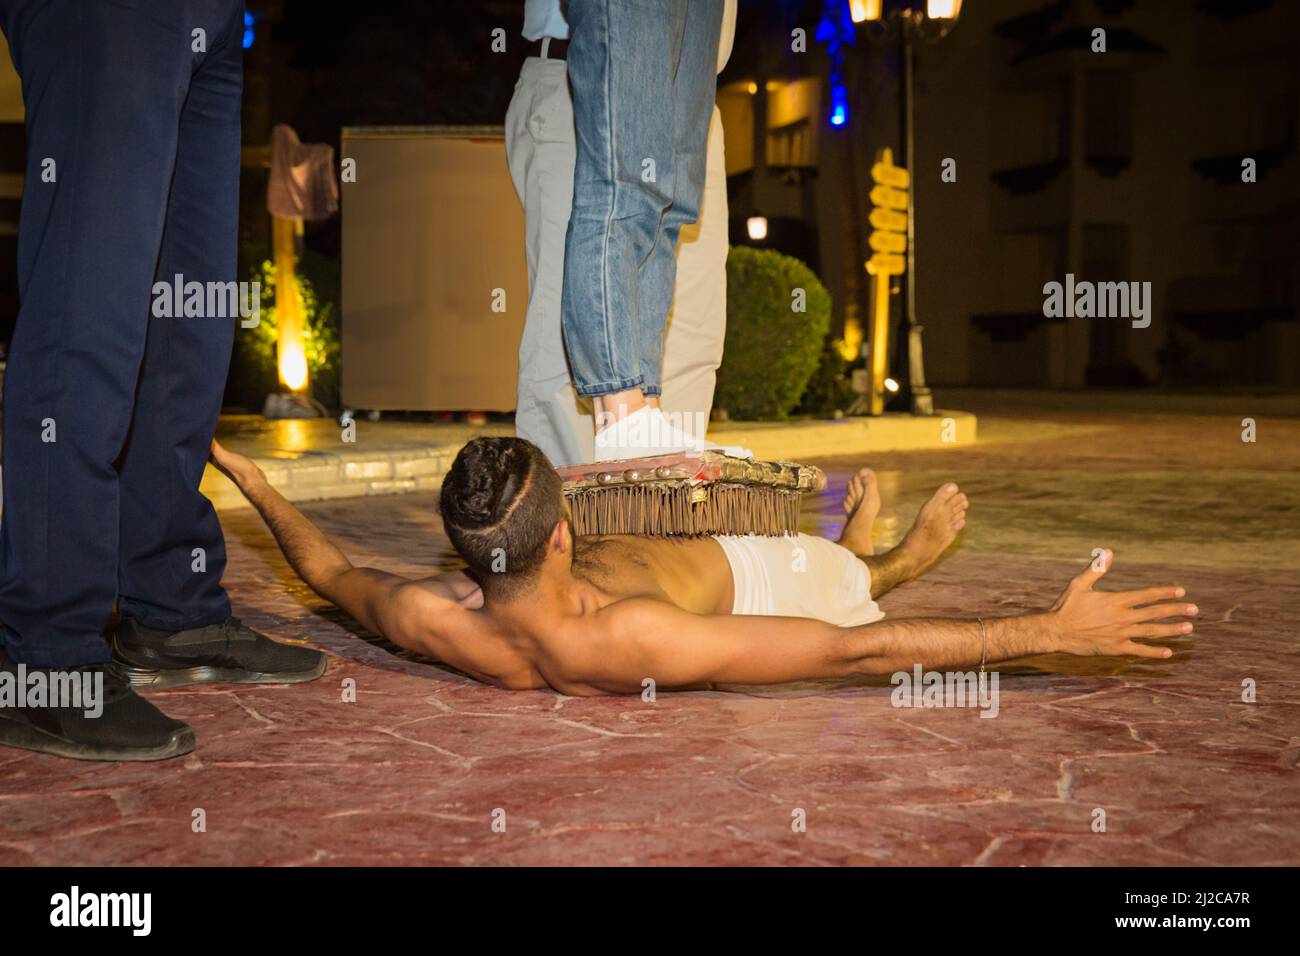 Actor fakir stuntman lies on a bed of nails without getting hurt. Stock Photo